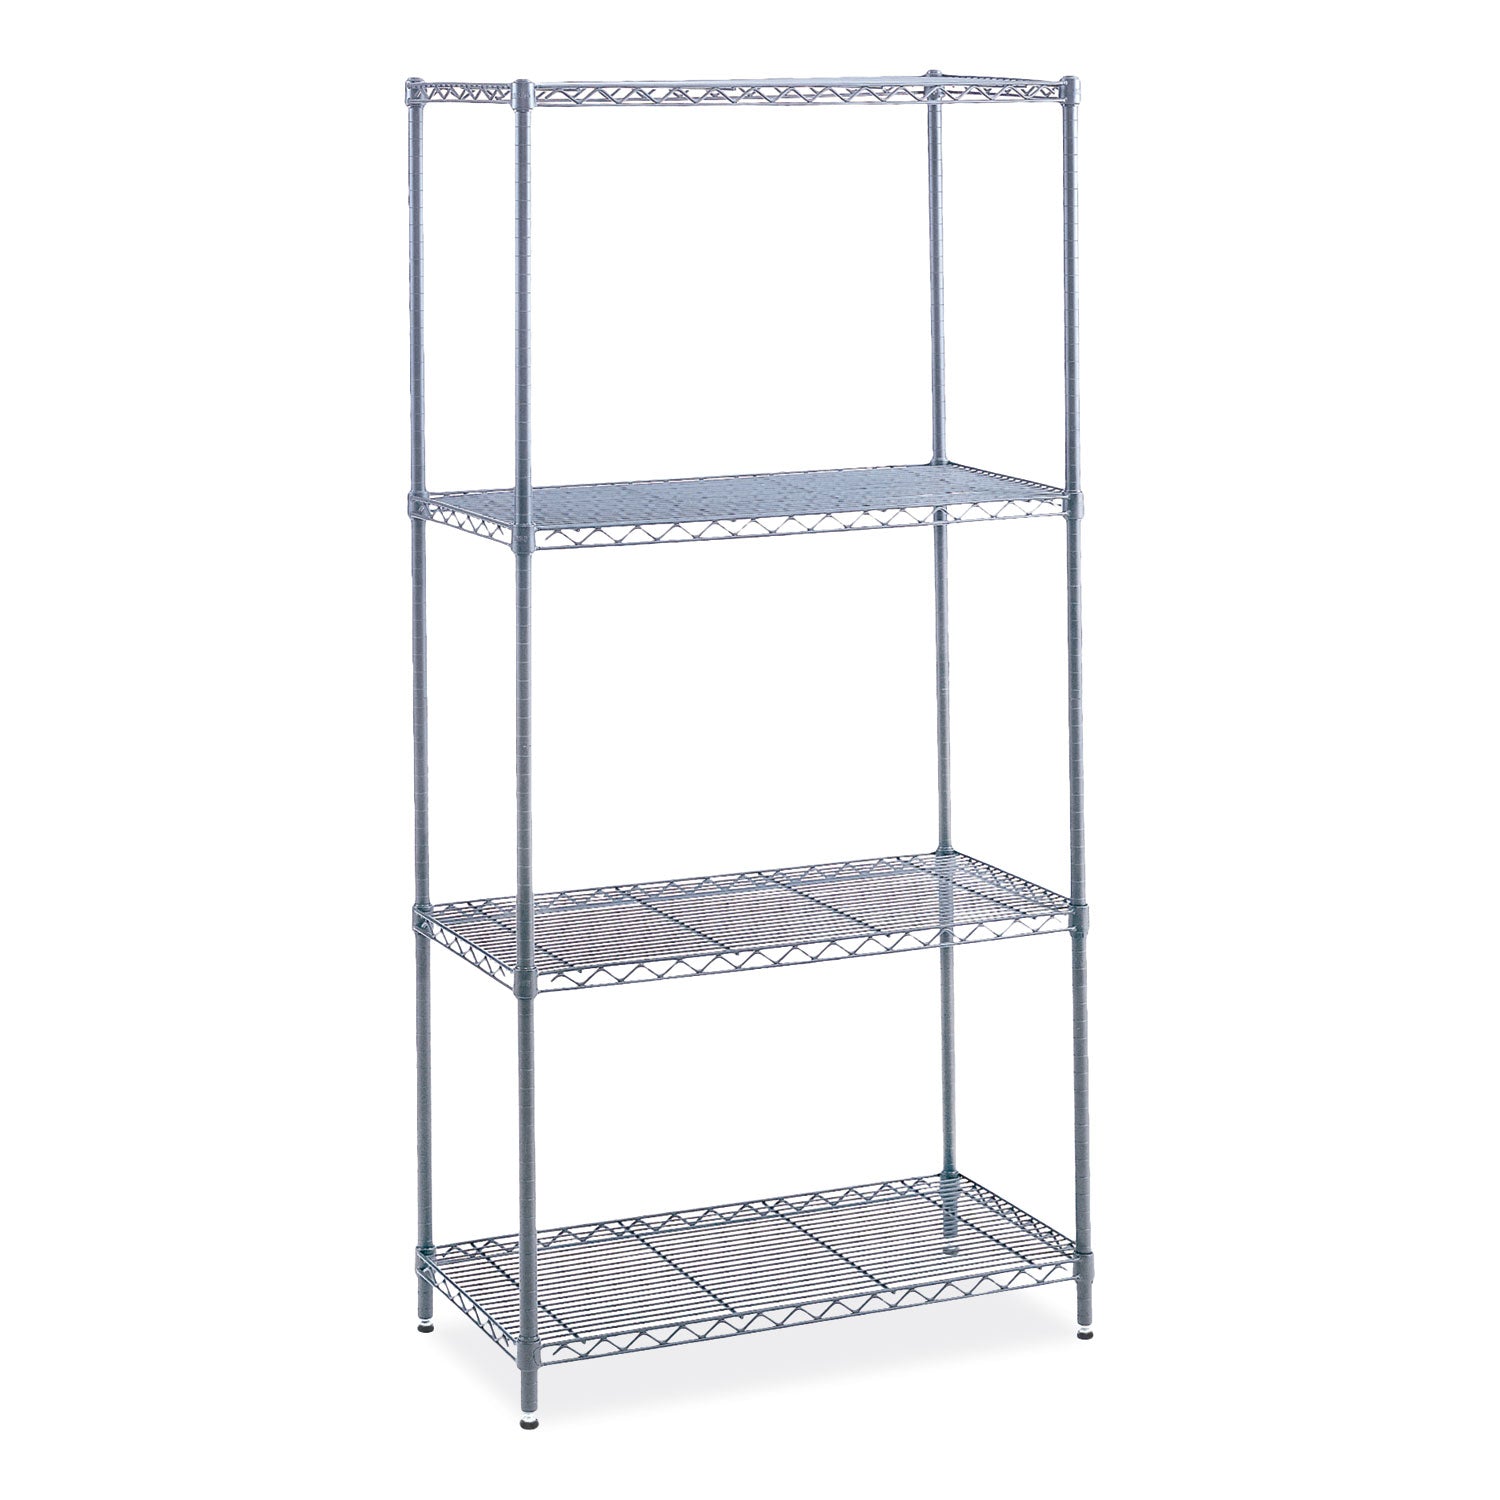 industrial-wire-shelving-four-shelf-36w-x-24d-x-72h-metallic-gray-ships-in-1-3-business-days_saf5288gr - 1